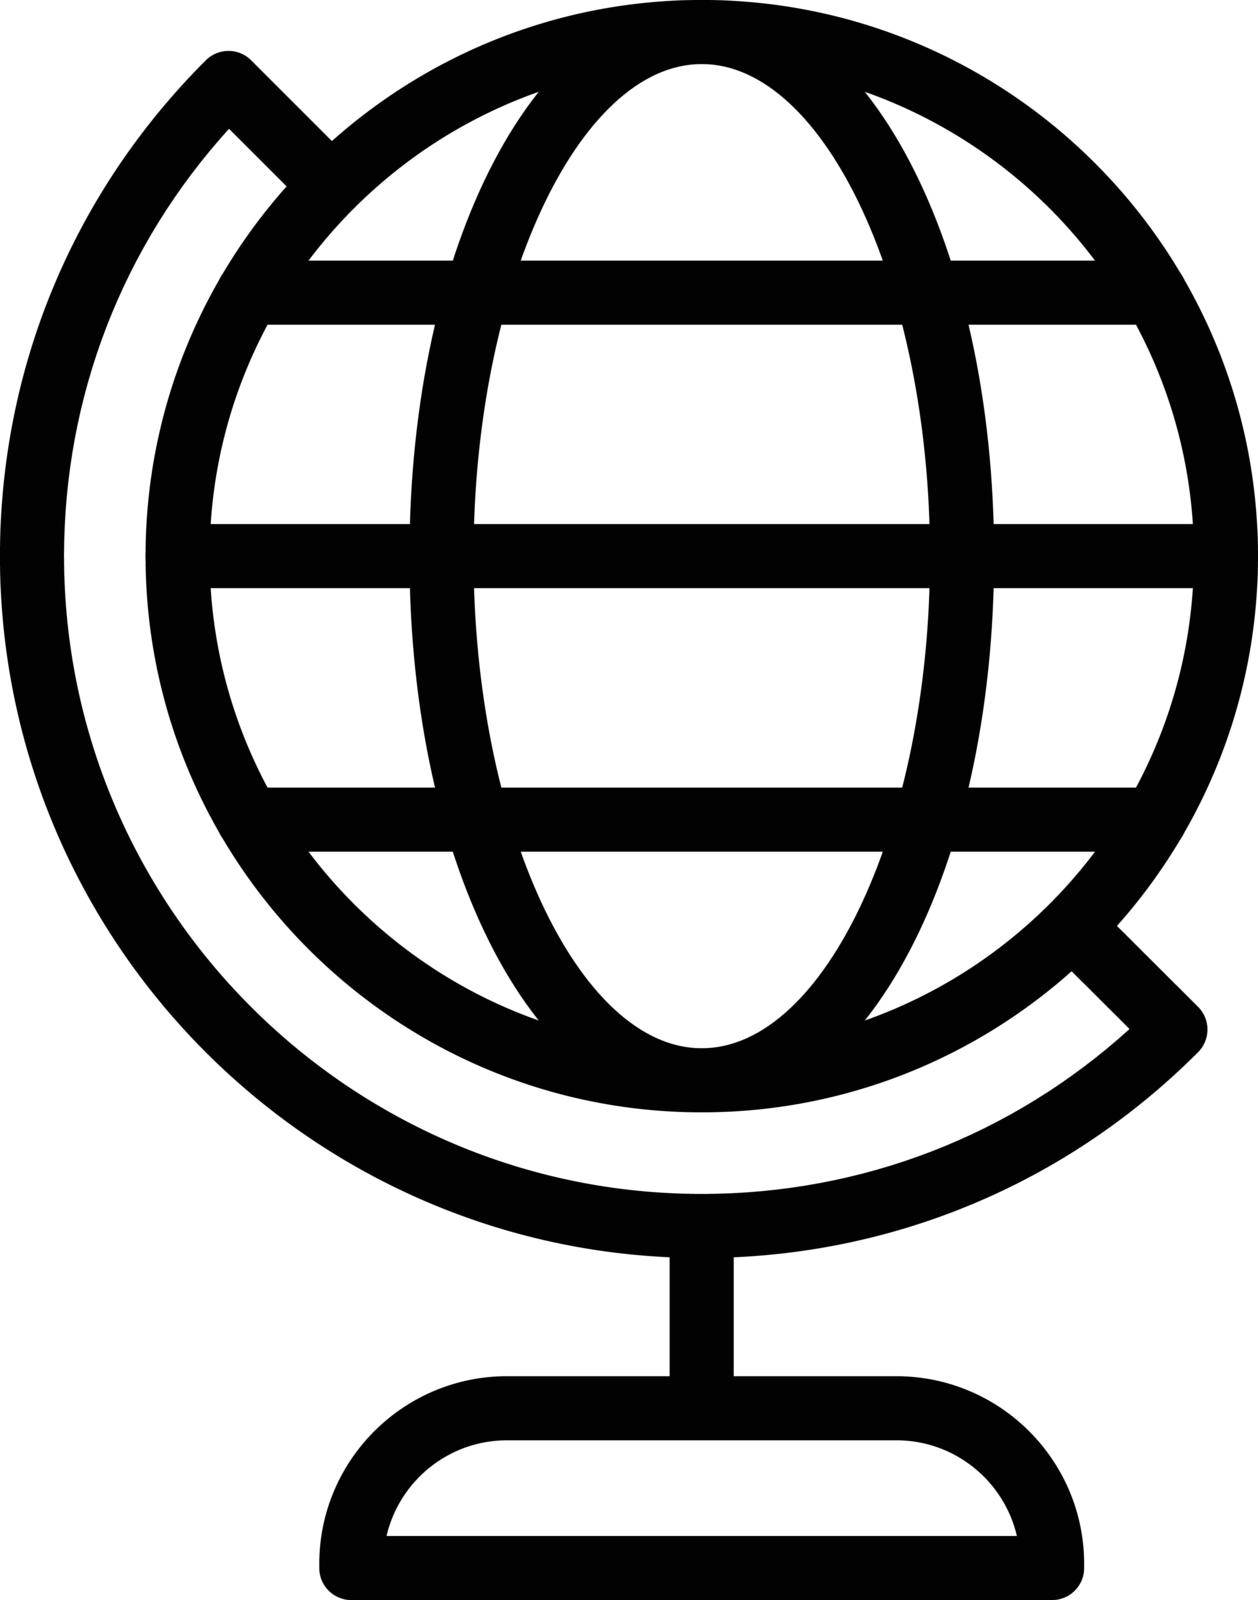 globe Icon isolated on white background. Vector illustration. Eps10. Vector icon for website design and app